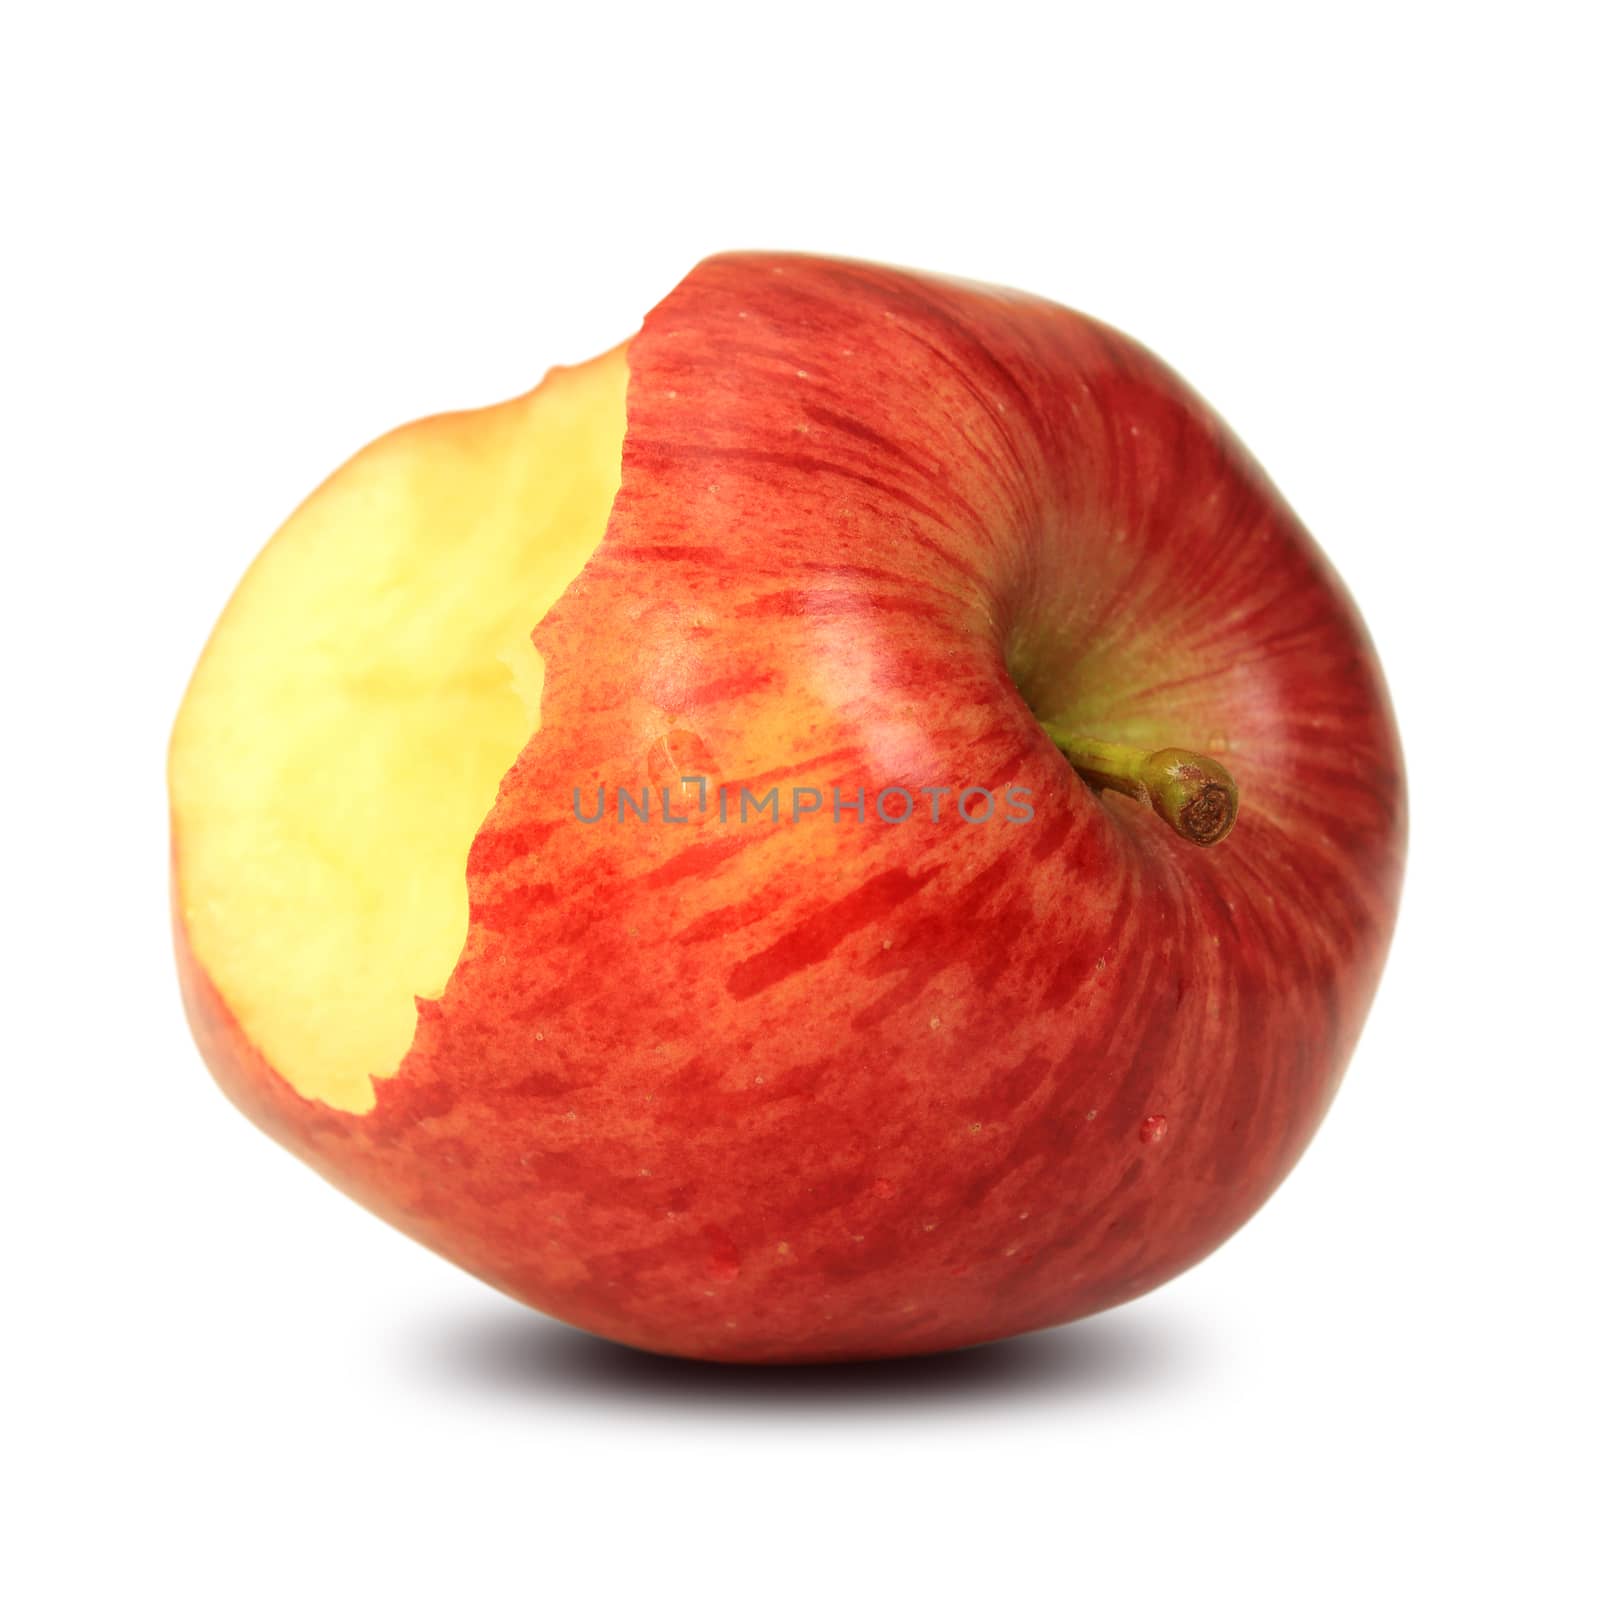 Bitten red apple isolated on white